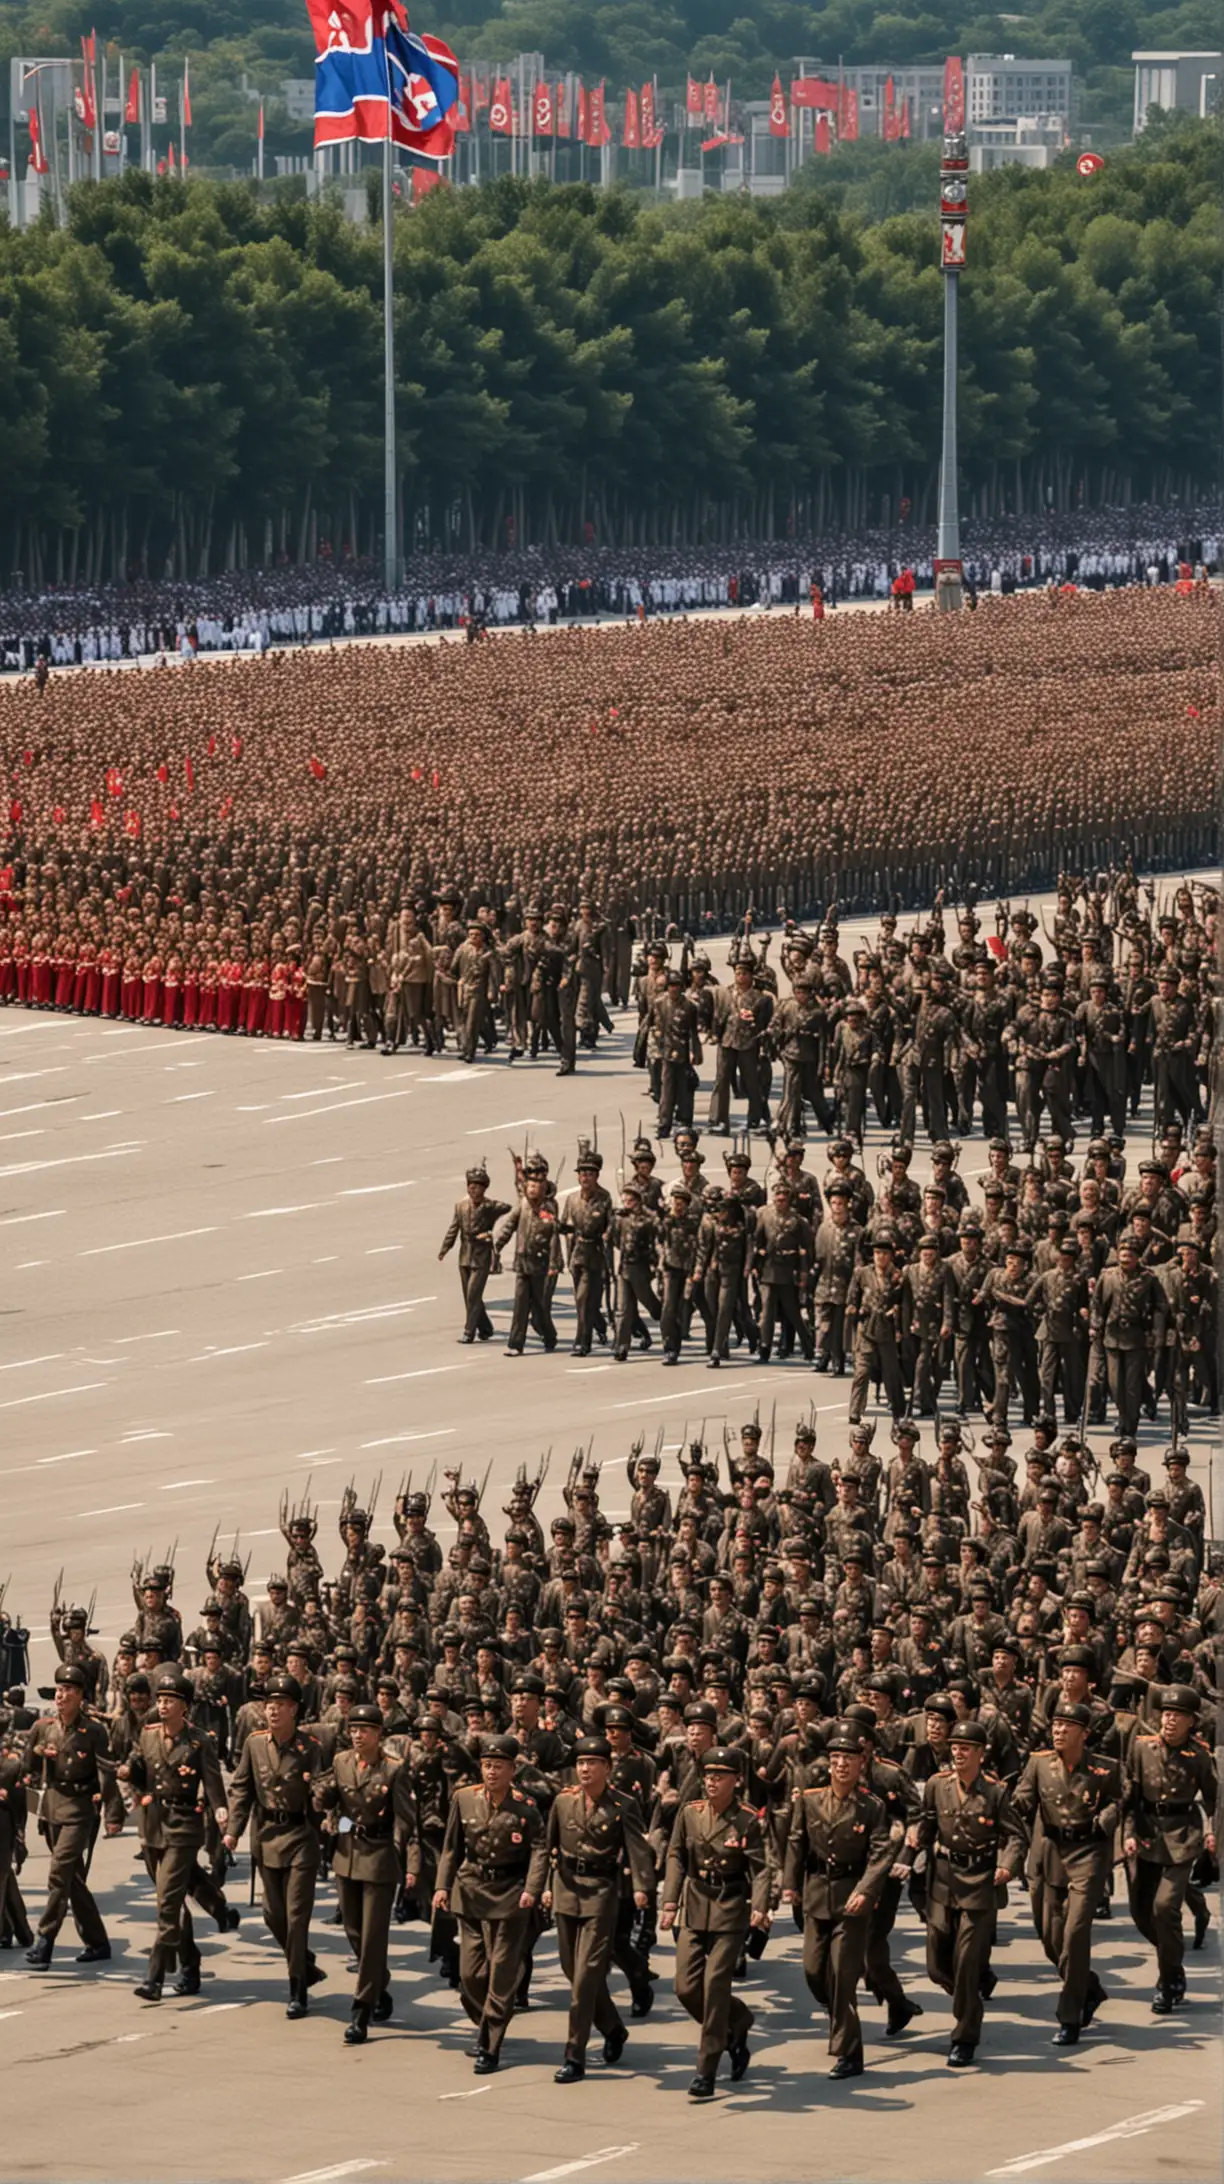 North Korean Military Parades: Show an elaborate military parade in Pyongyang, with soldiers marching, military hardware on display, and citizens cheering, reflecting the militaristic and nationalistic spirit of the country.